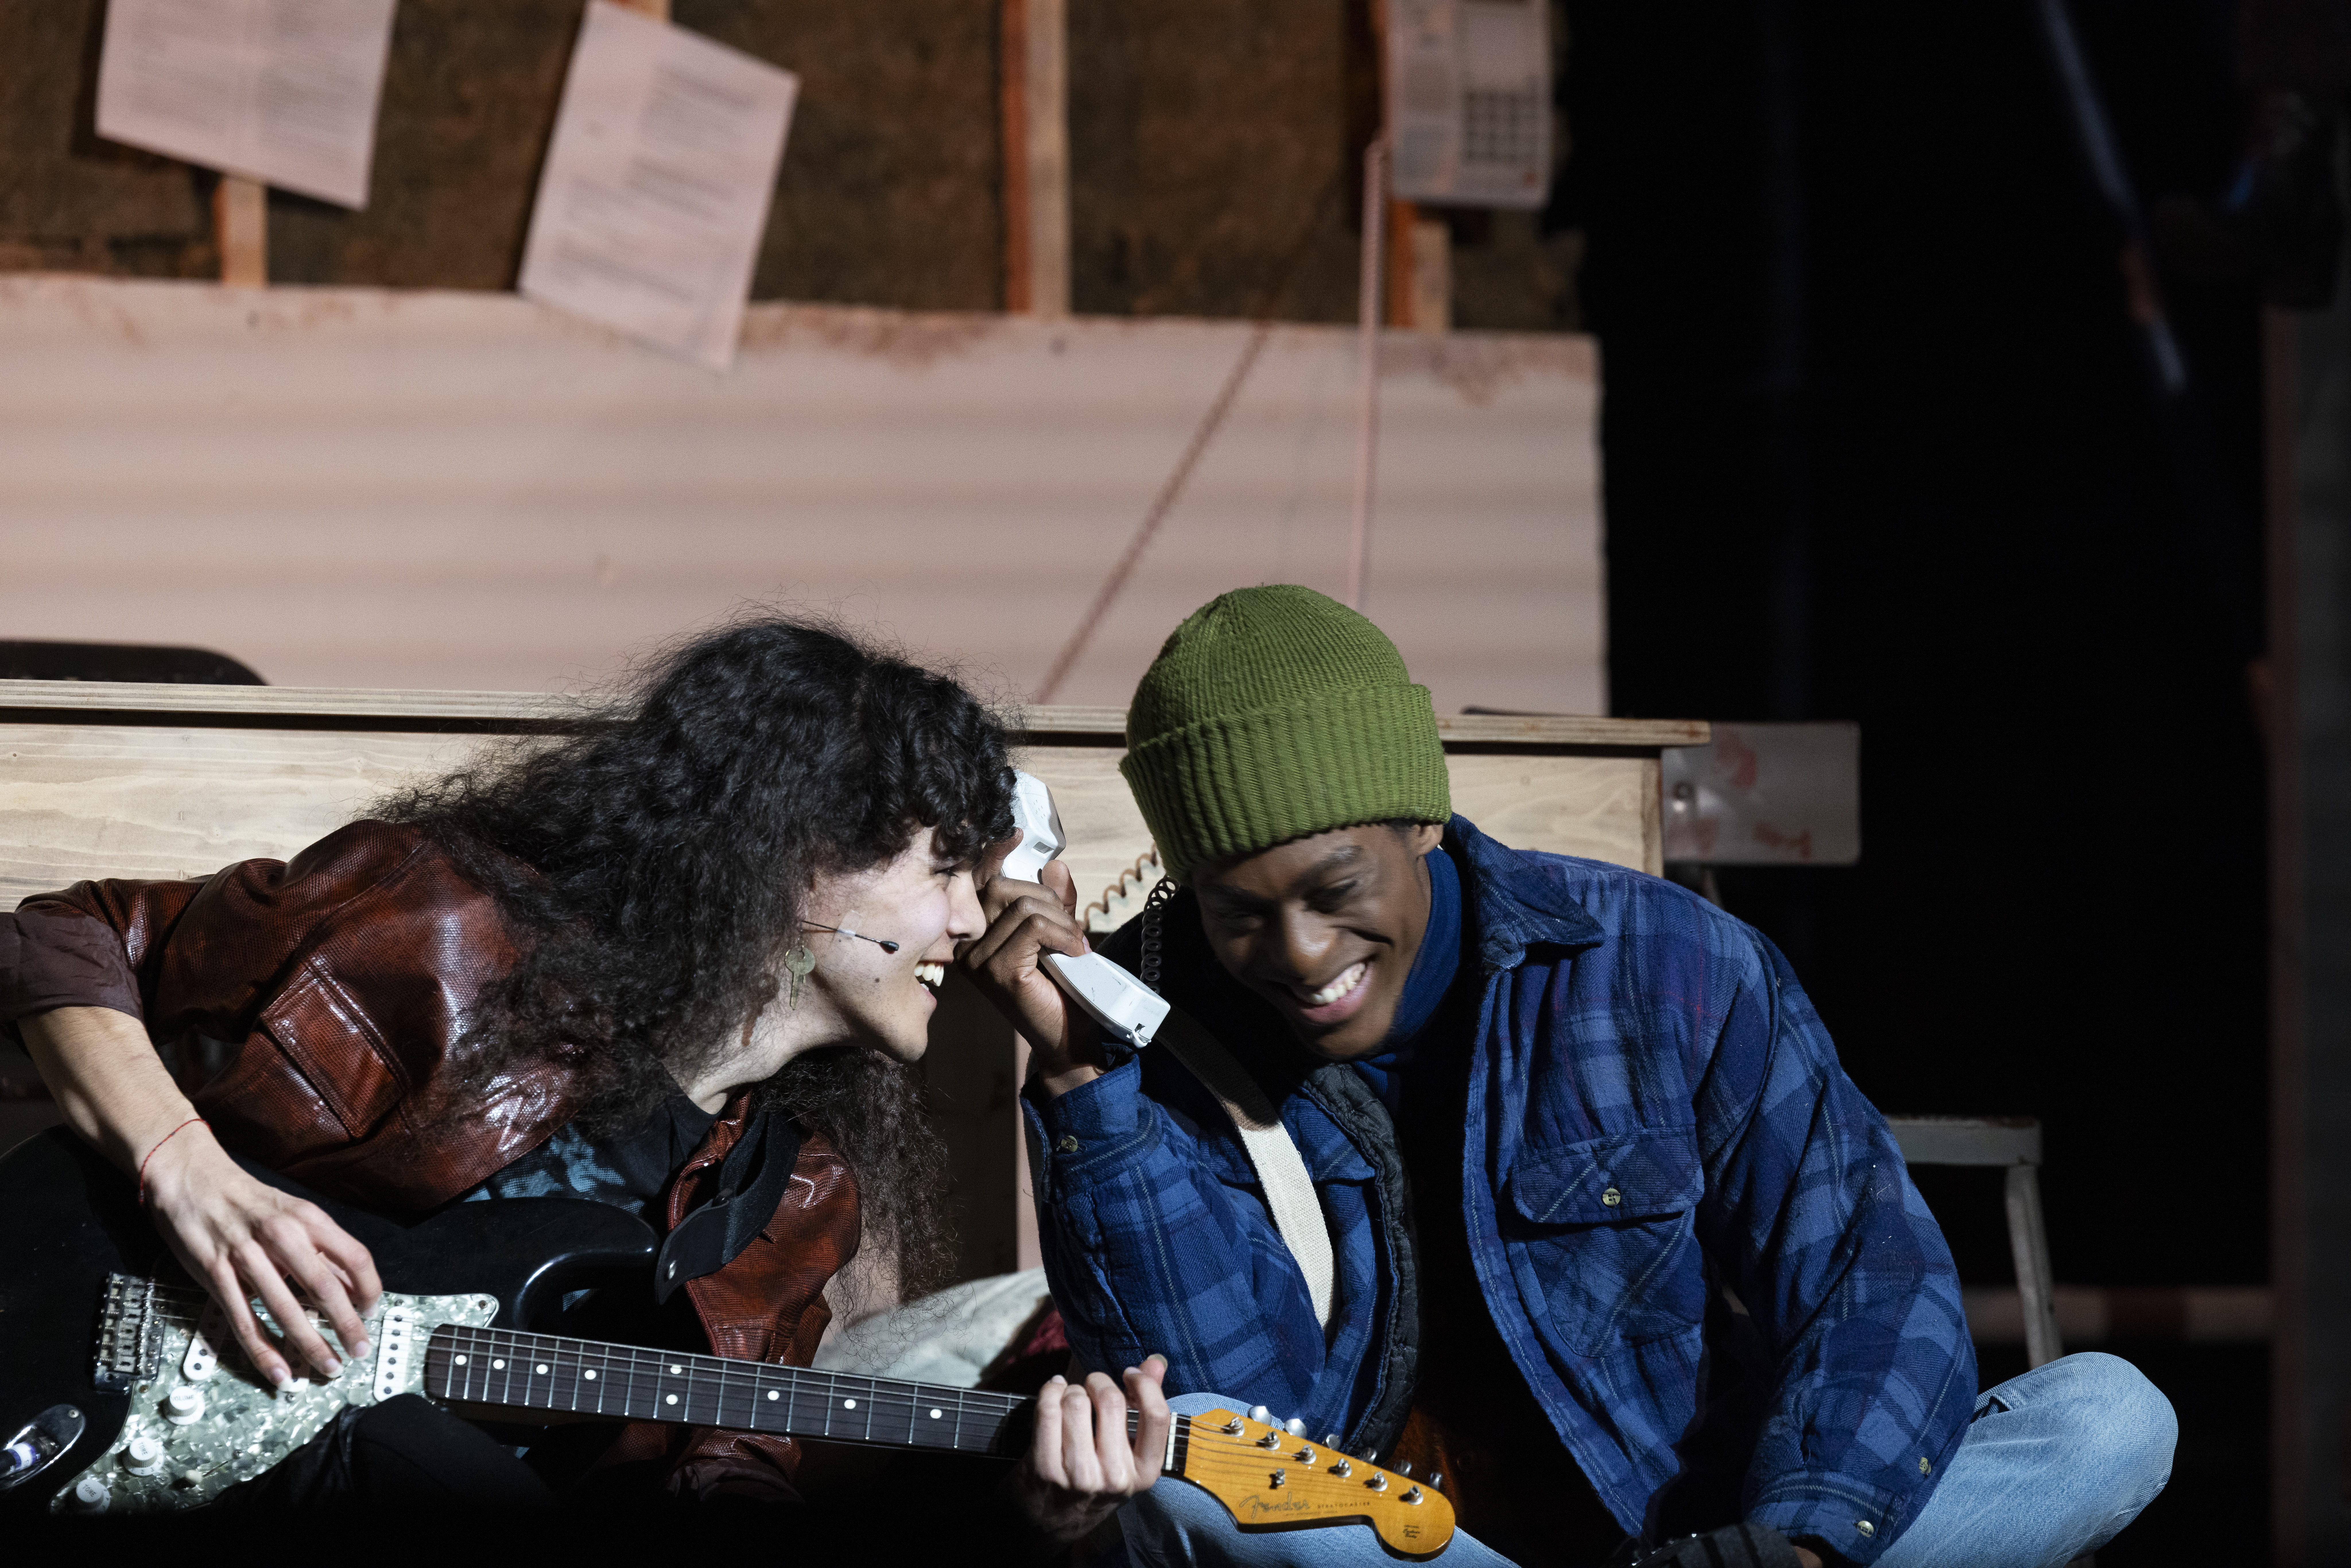 Two students sit close together, one plays an electric guitar while the other holds a telephone receiver, during a production of “Rent.”